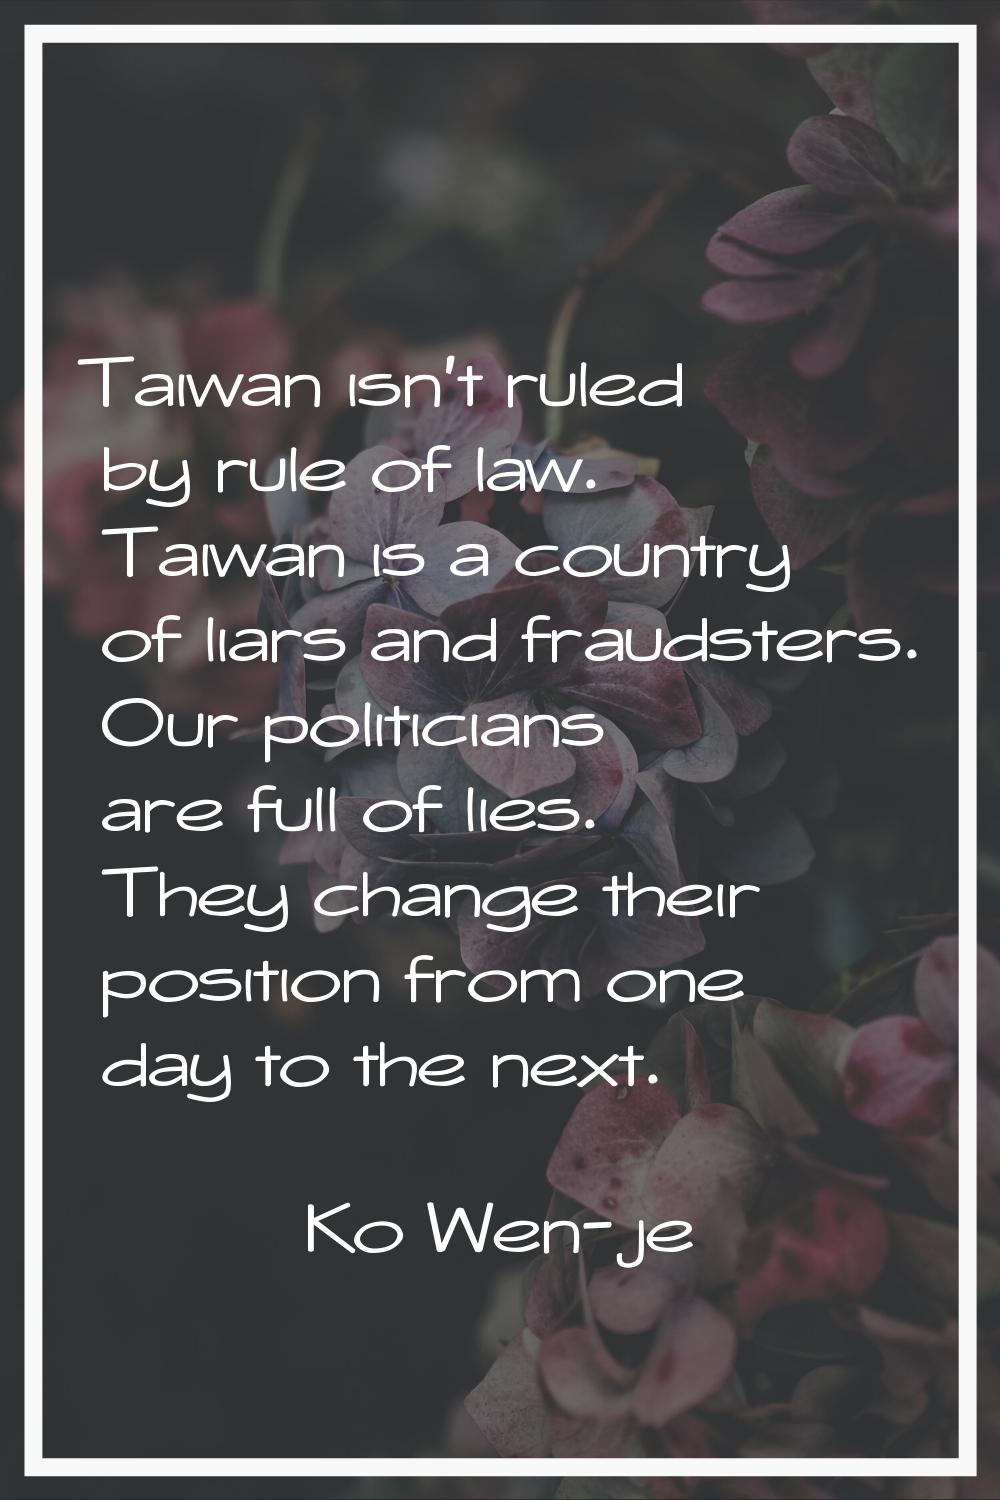 Taiwan isn't ruled by rule of law. Taiwan is a country of liars and fraudsters. Our politicians are